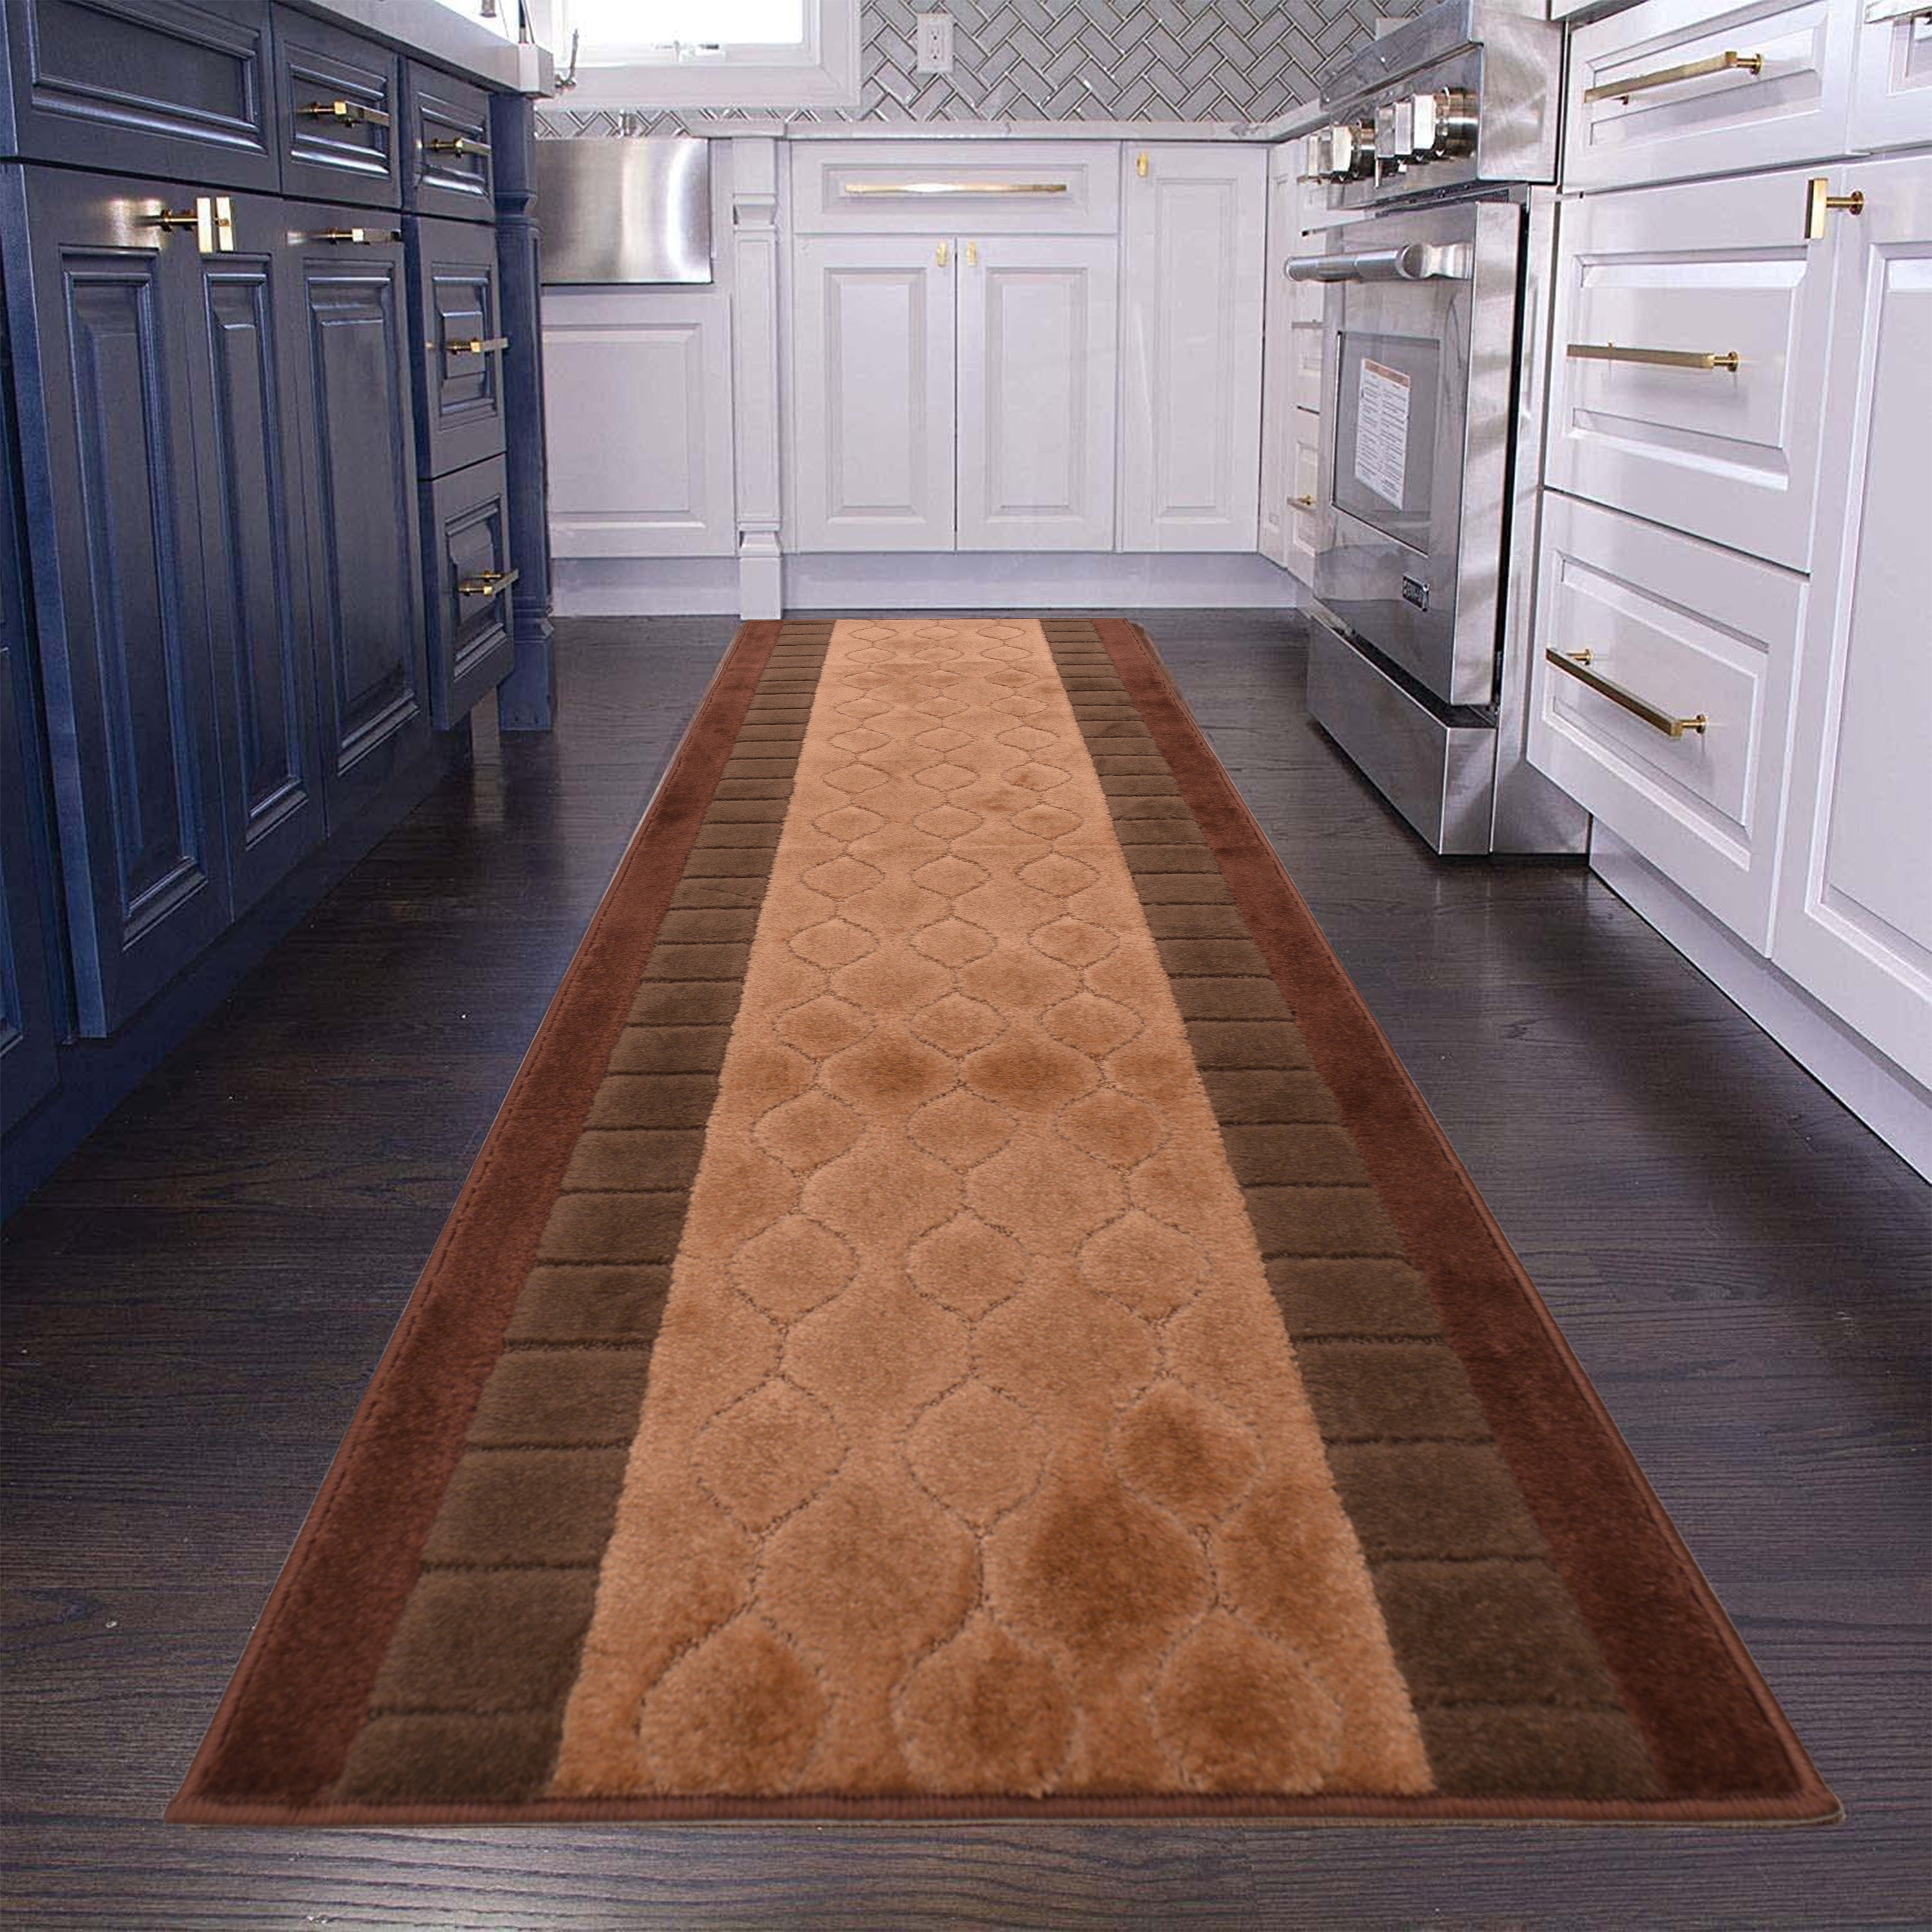 Custom Size Runner Rug Volley Circle Beige-Brown Color Skid Resistant Rug Runner Customize Up to 50 Feet and 30 Inch Width Cut to Size Rugs-1